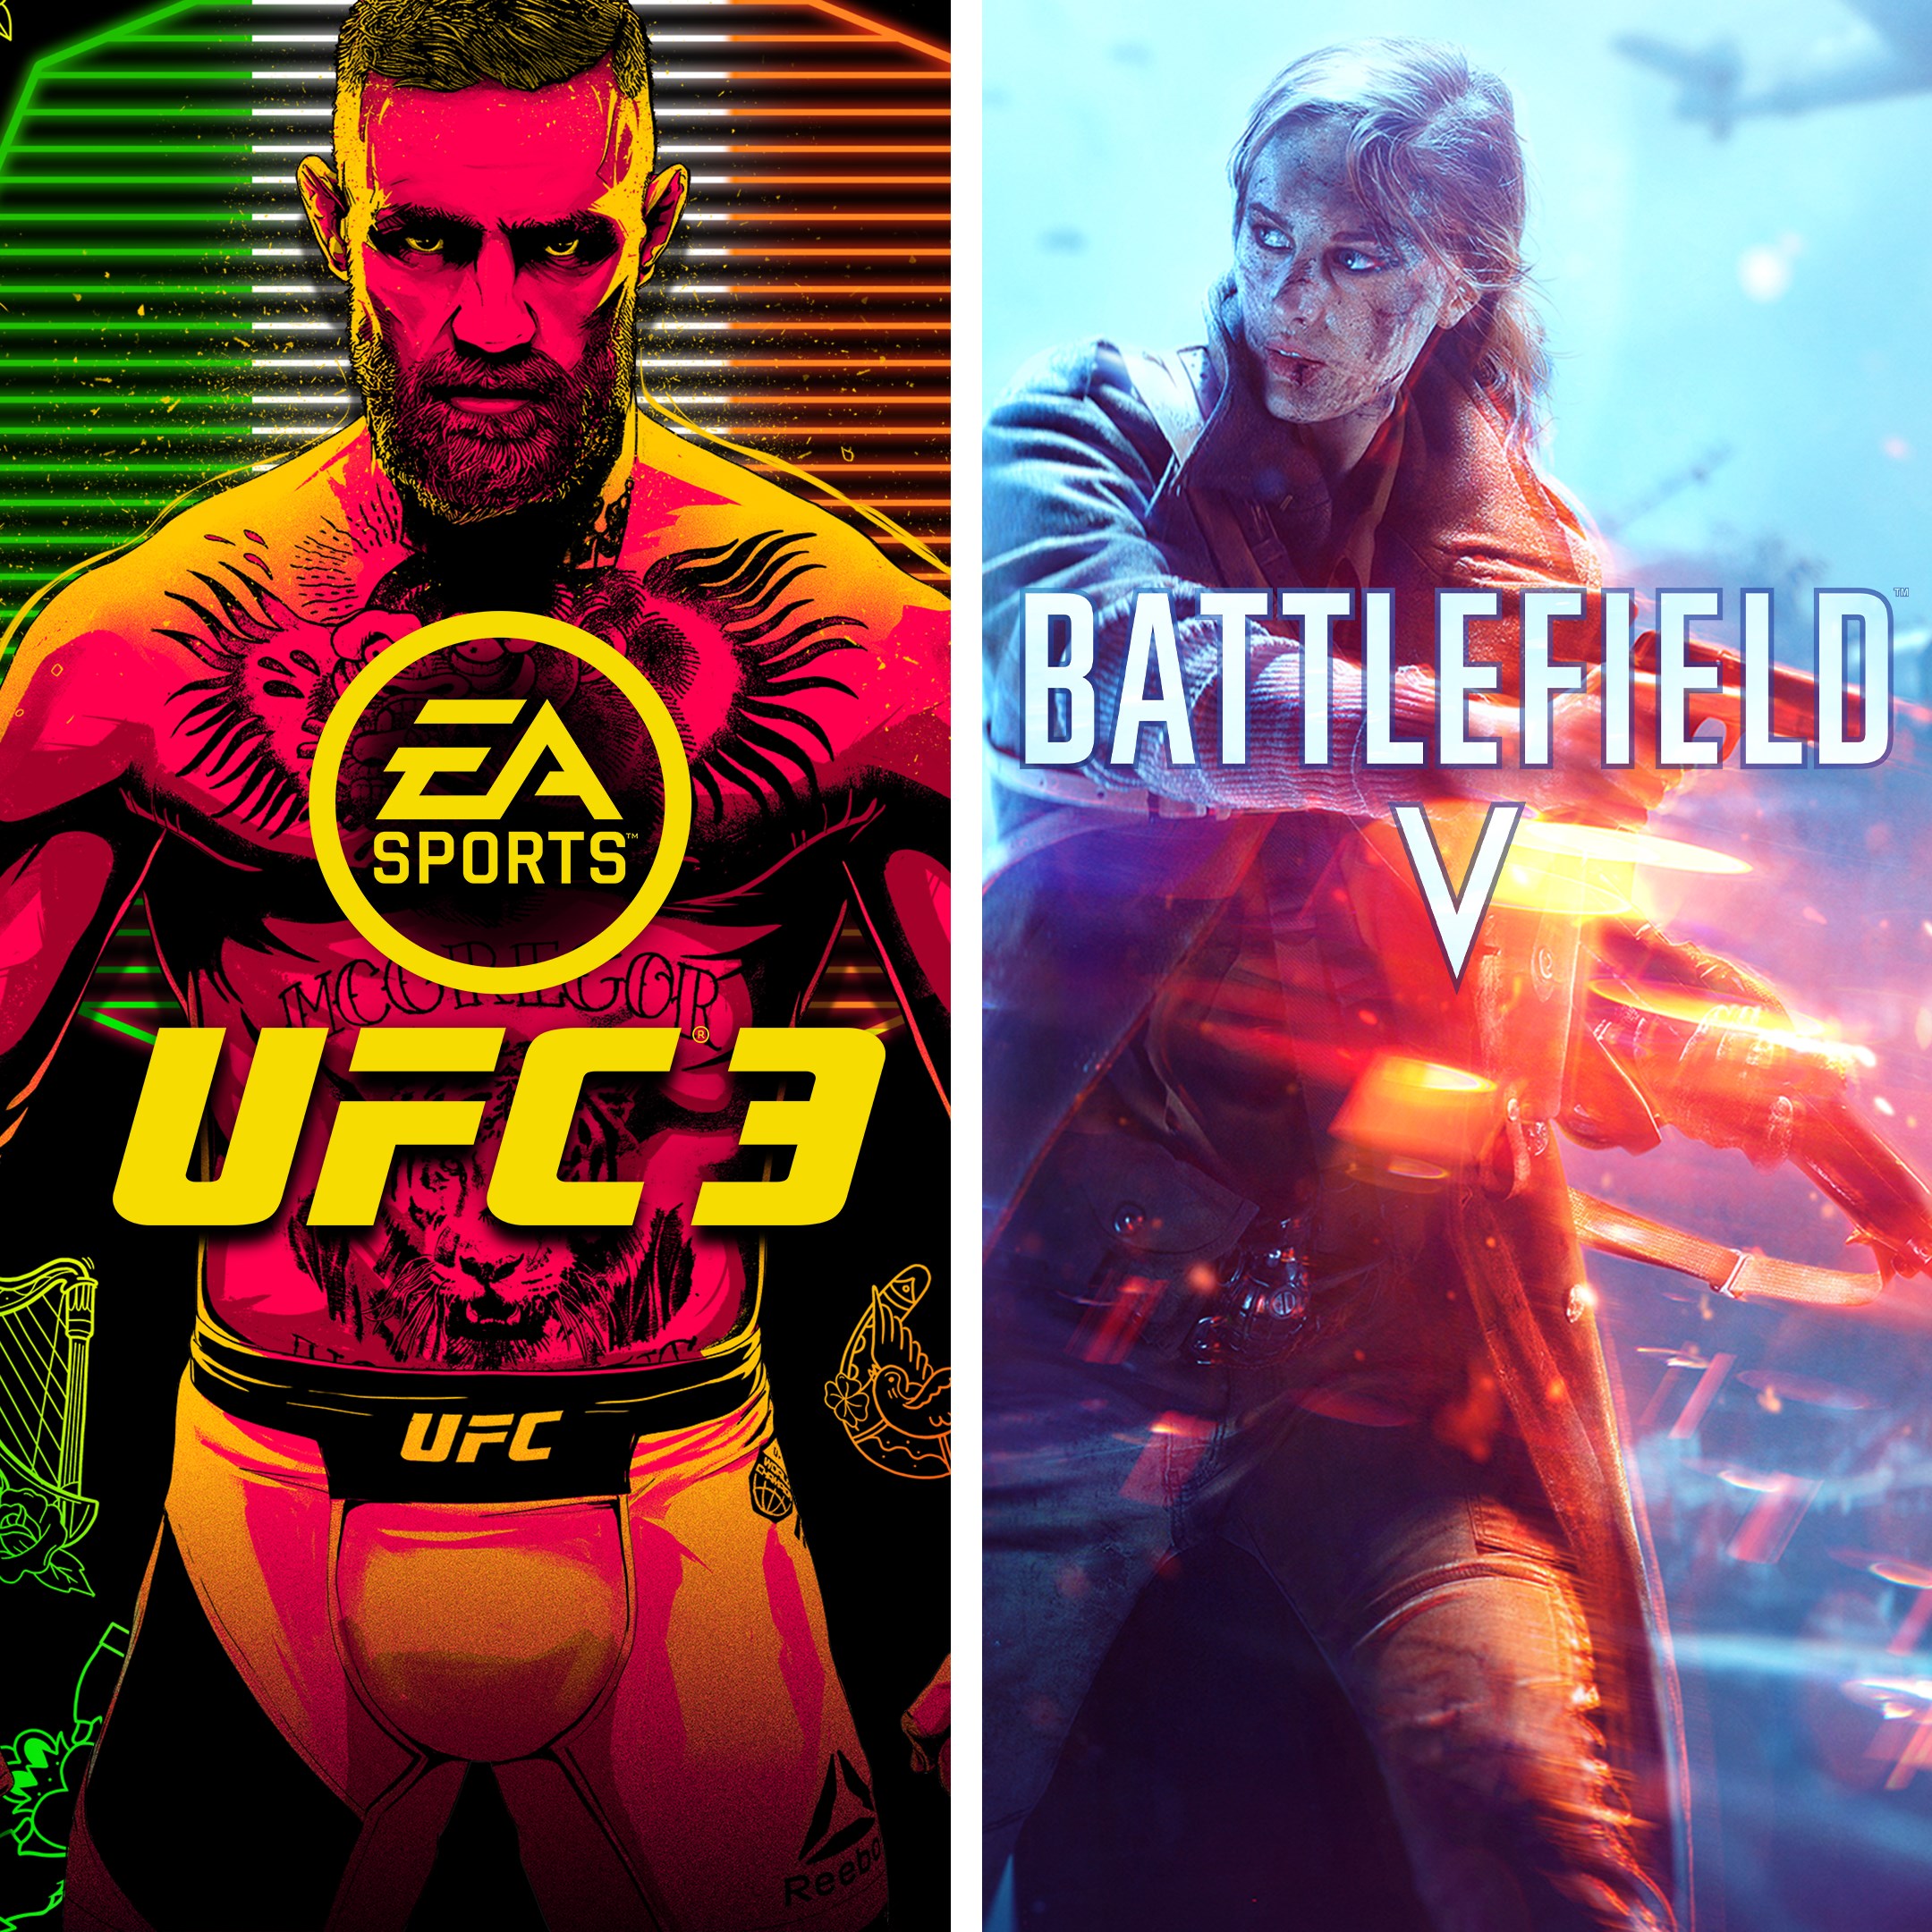 Battlefield V And EA Sports UFC 3 Bundle Available For Xbox One - Xbox Wire